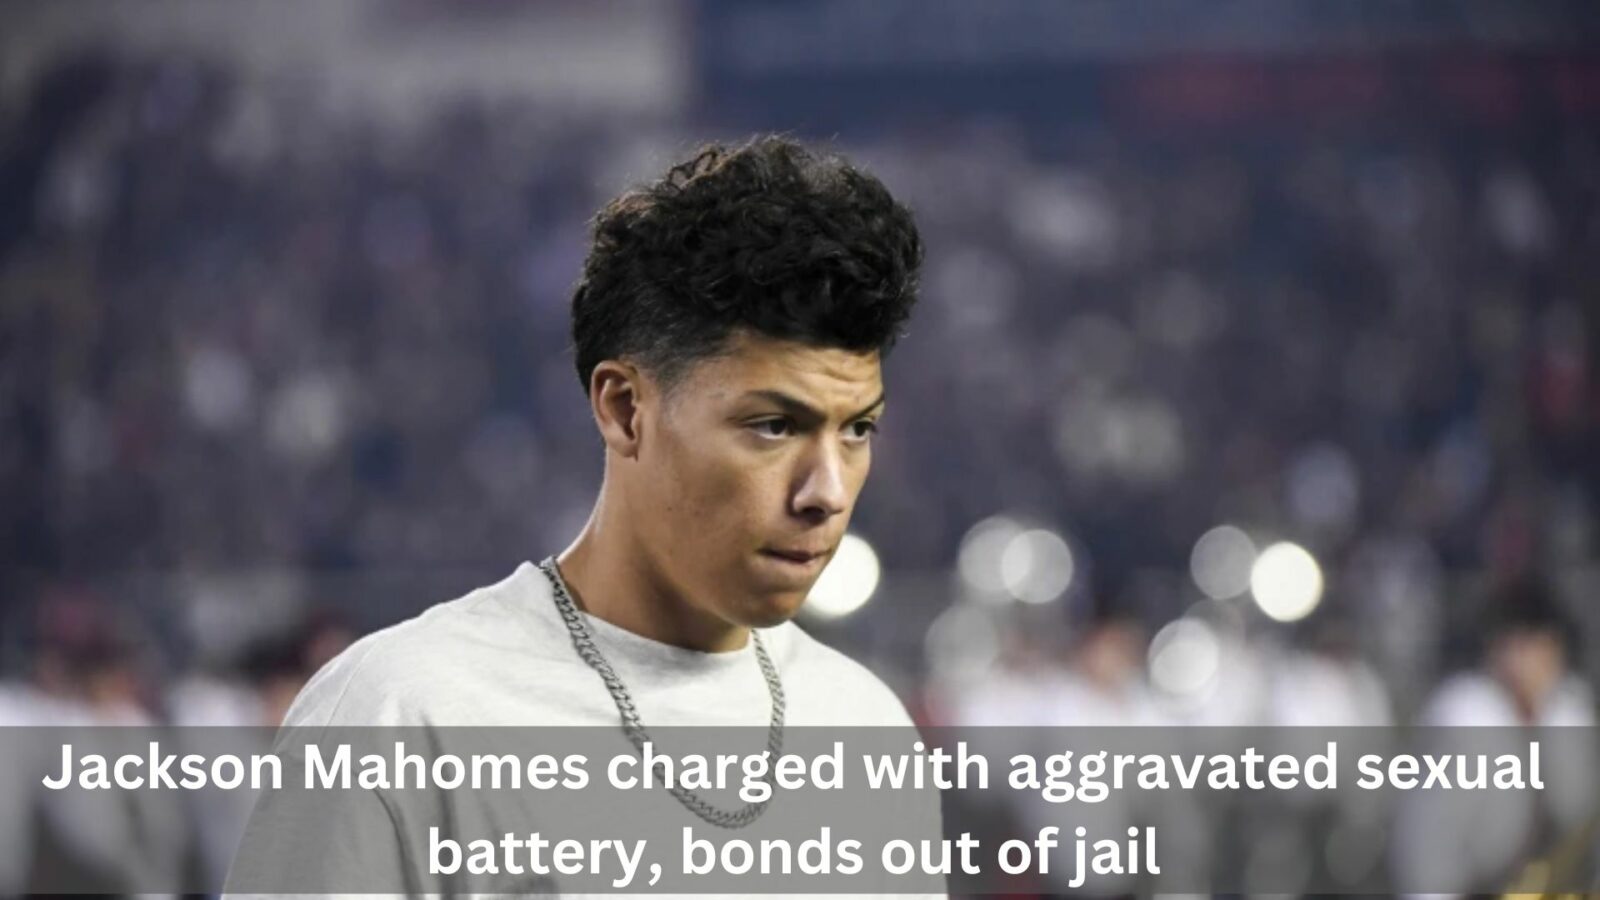 Jackson Mahomes charged with aggravated sexual battery, bonds out of jail